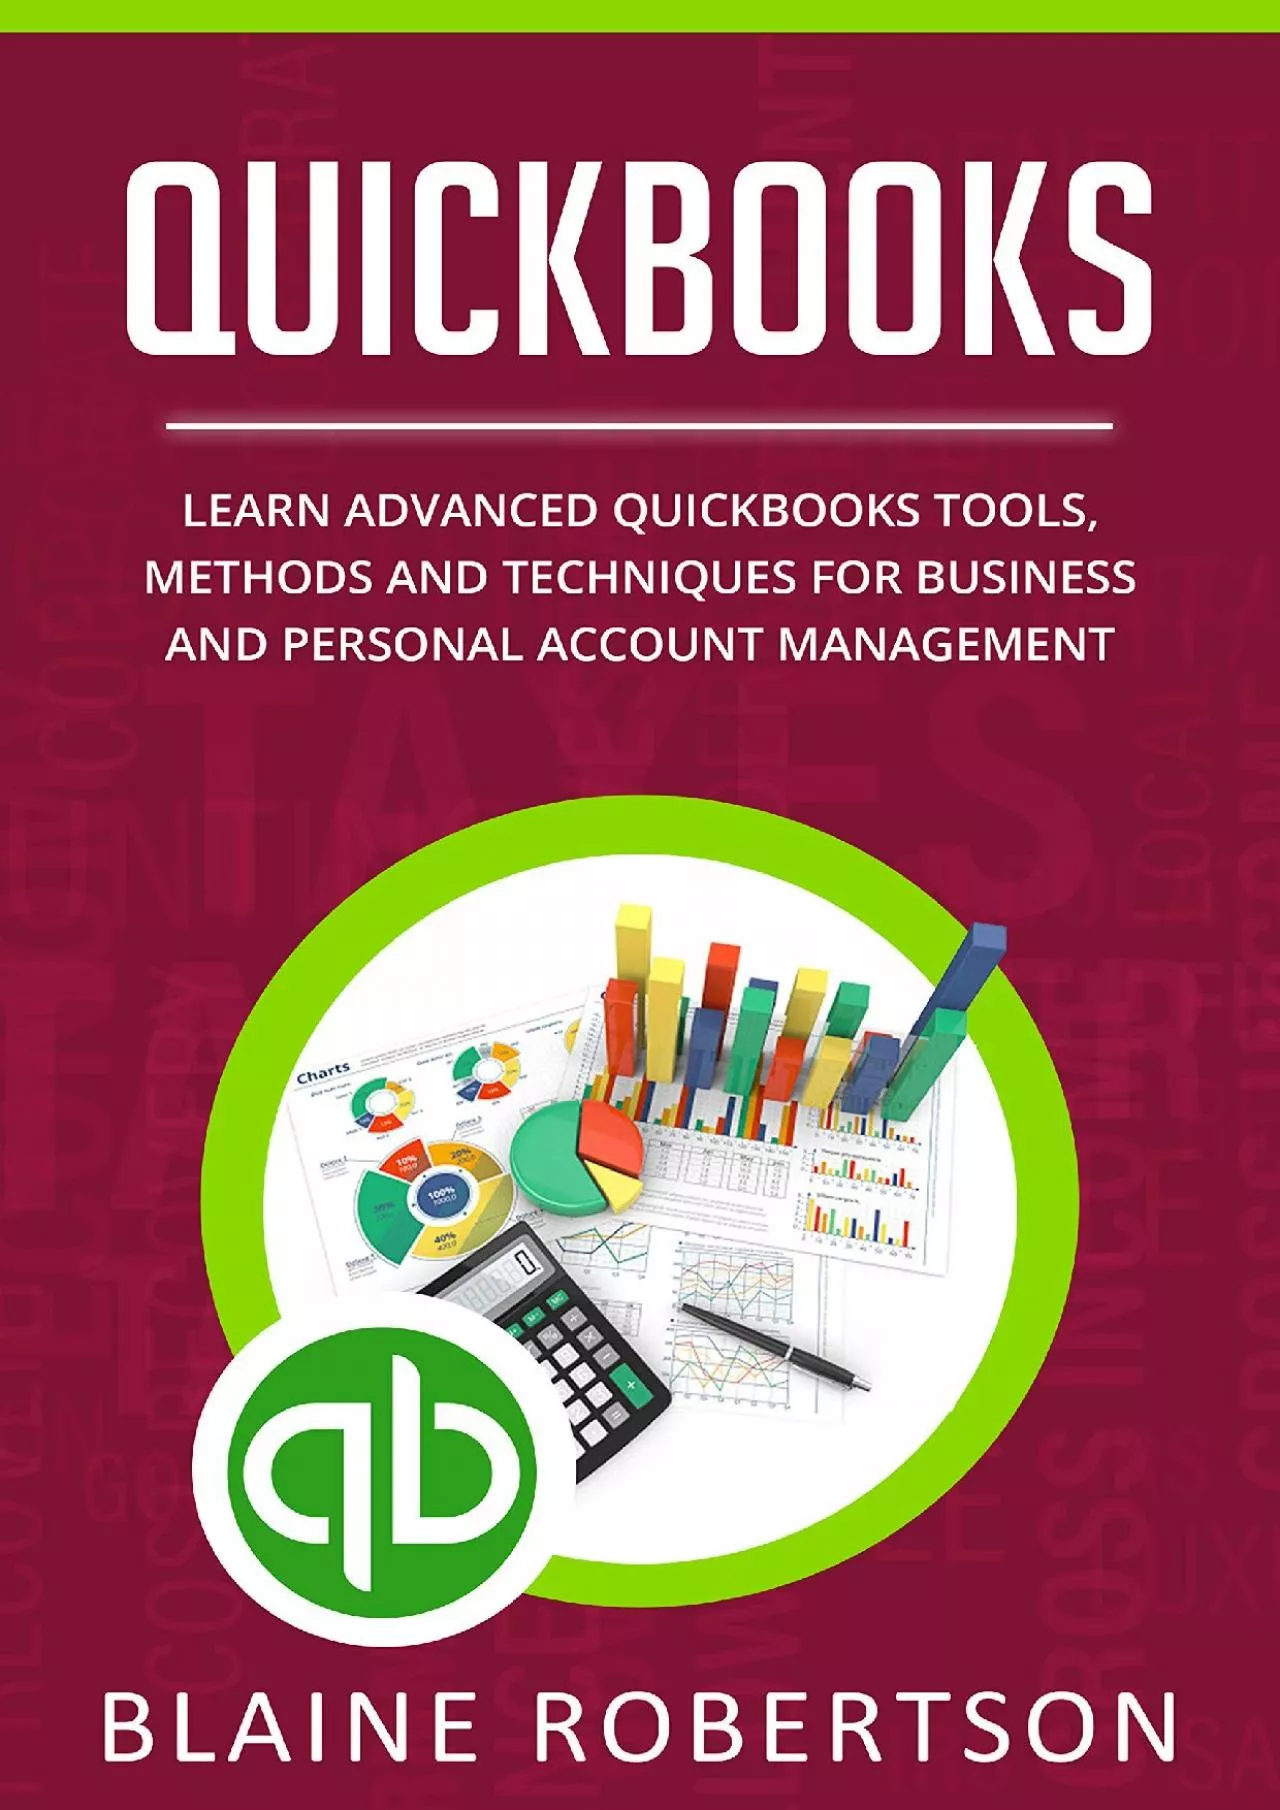 Quickbooks: Learn Advanced Quickbooks Tools Methods and Techniques for Business and Personal